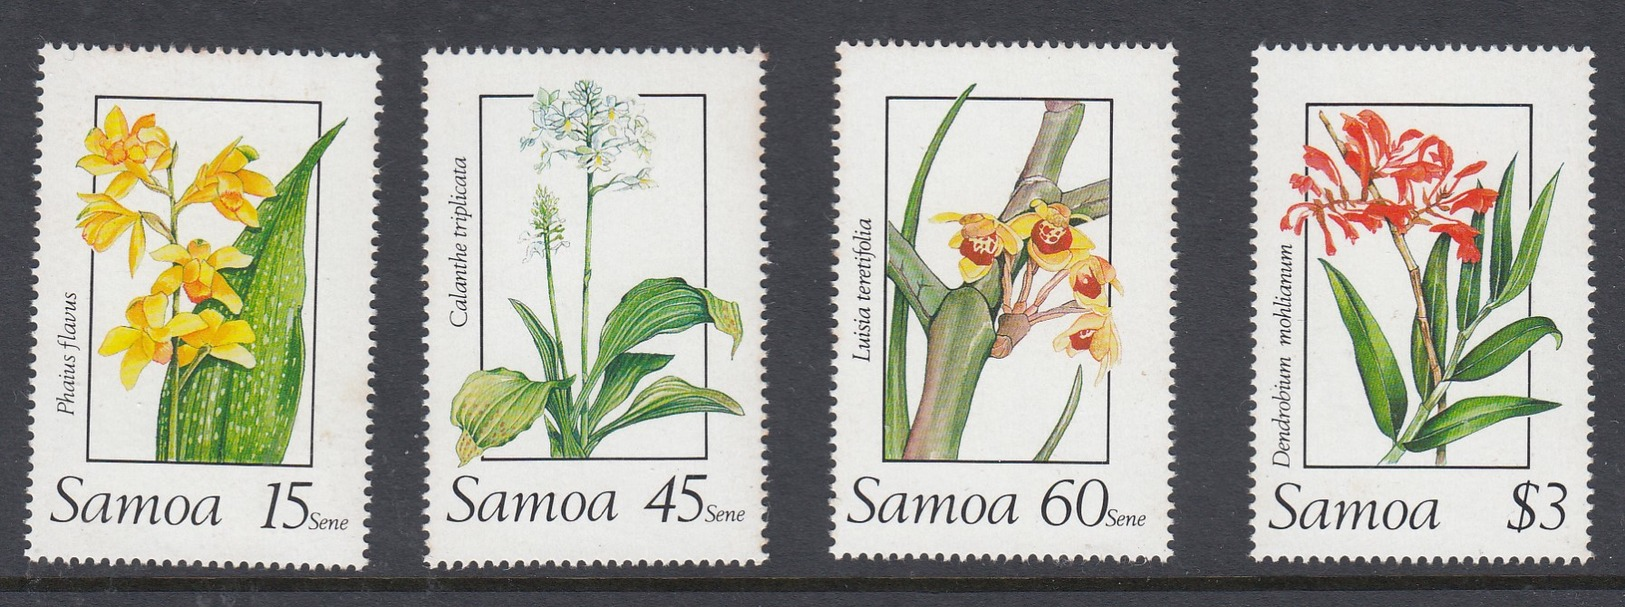 Samoa 1989 Orchids (2nd Series) - MUH Set 4 - Orchids